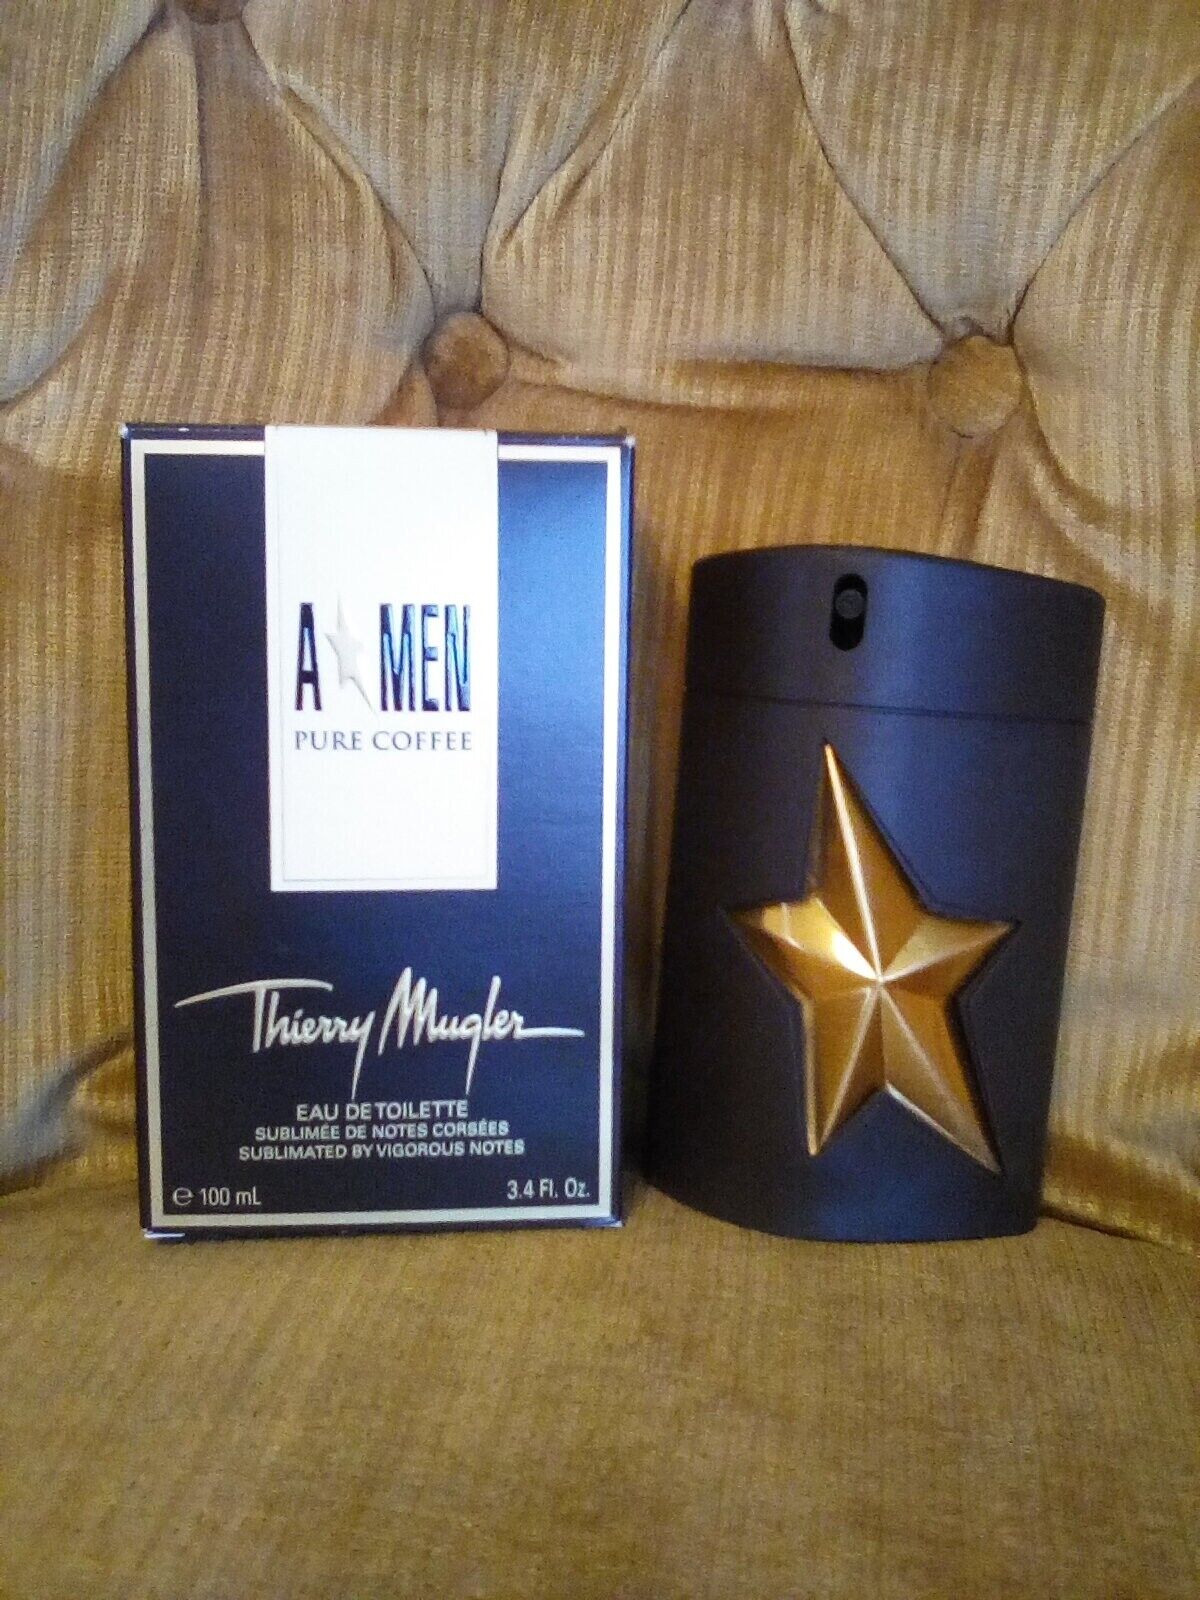 Thierry Mugler A*Men PURE COFFEE 2015 EDT 100ml/3.4 oz DISCONTINUED full in box